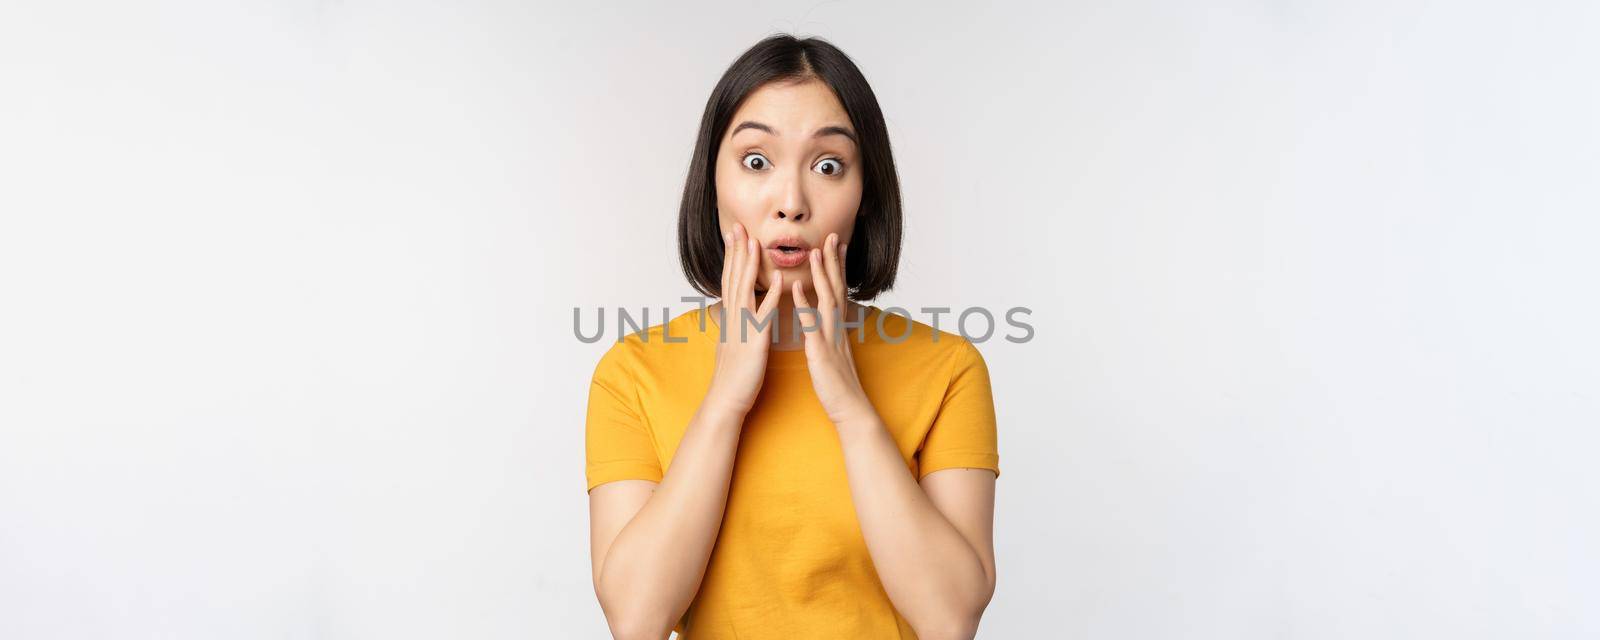 Close up portrait of asian woman looking surprised, wow face, staring impressed at camera, standing over white background in yellow t-shirt.